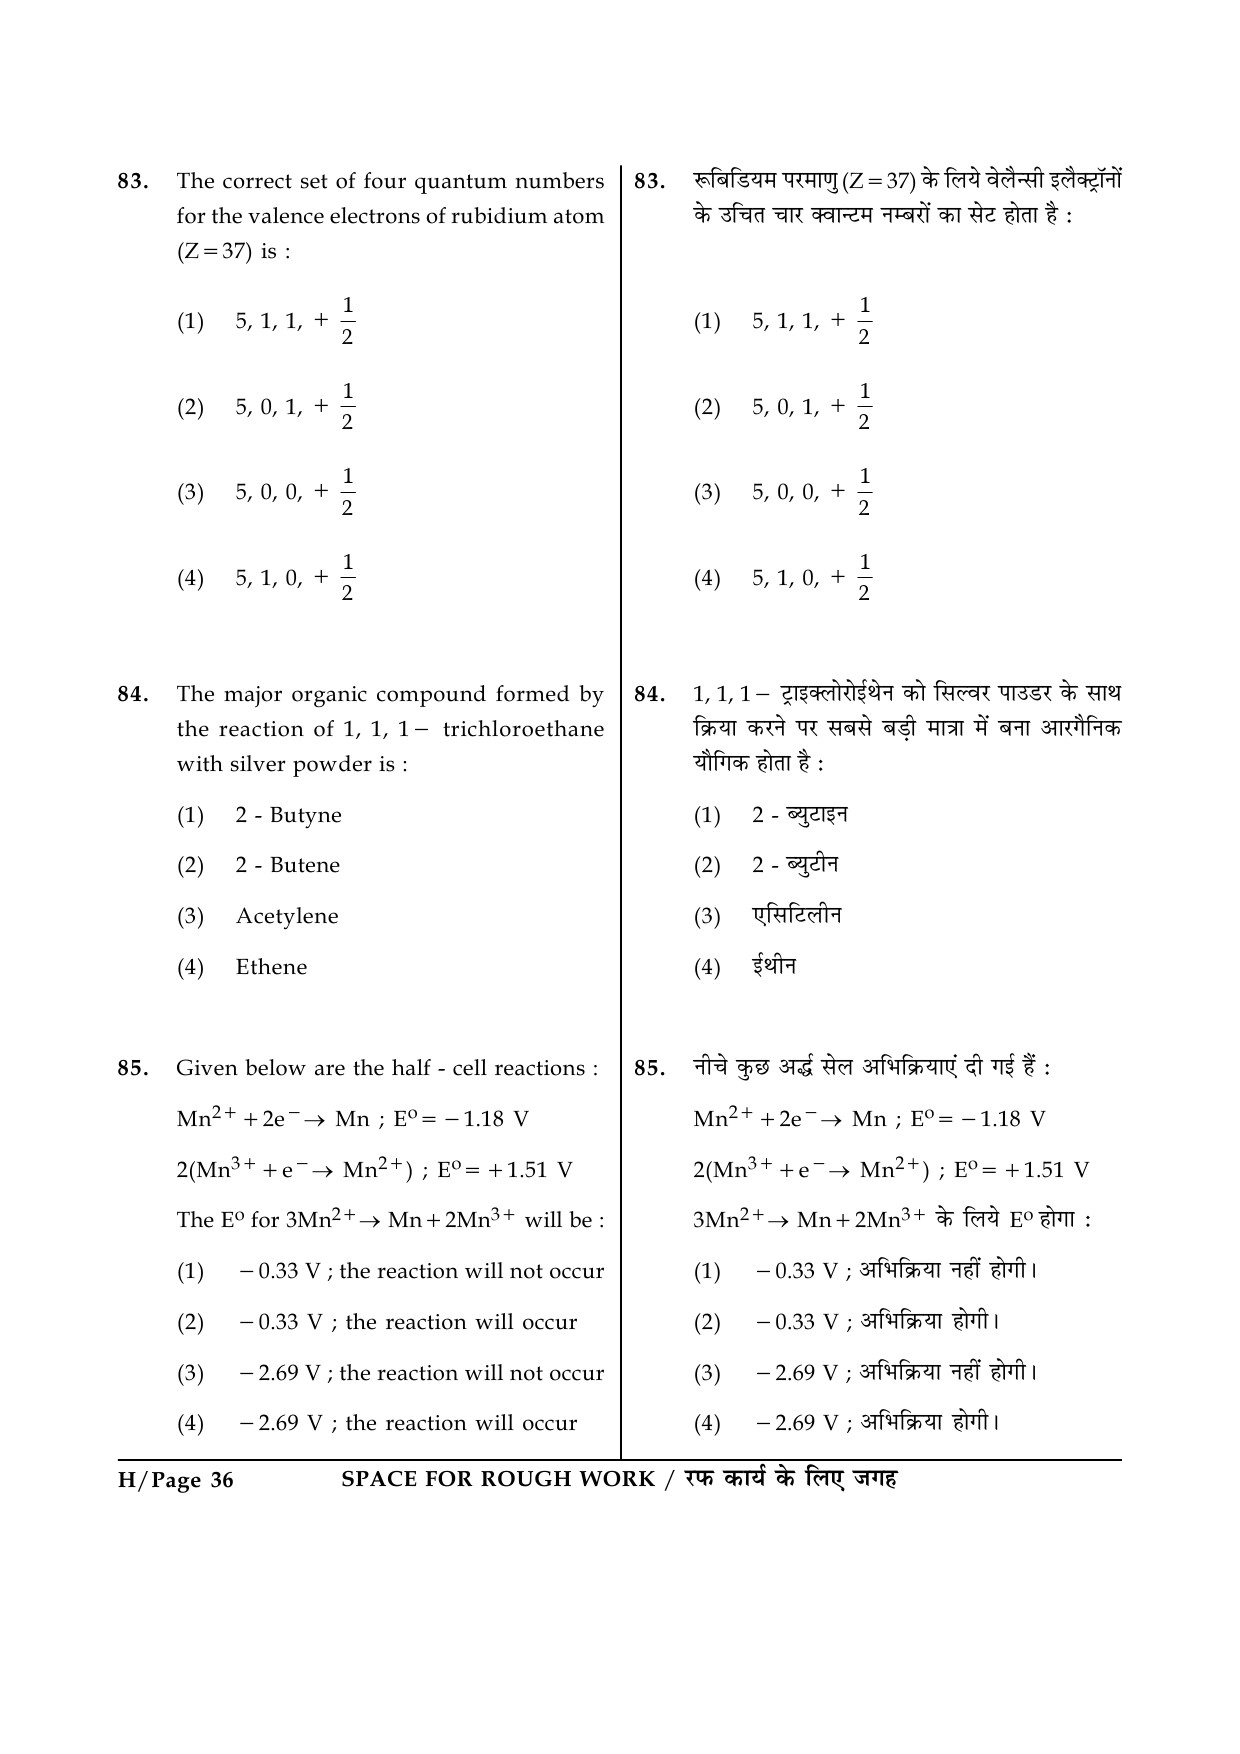 JEE Main Exam Question Paper 2014 Booklet H 36